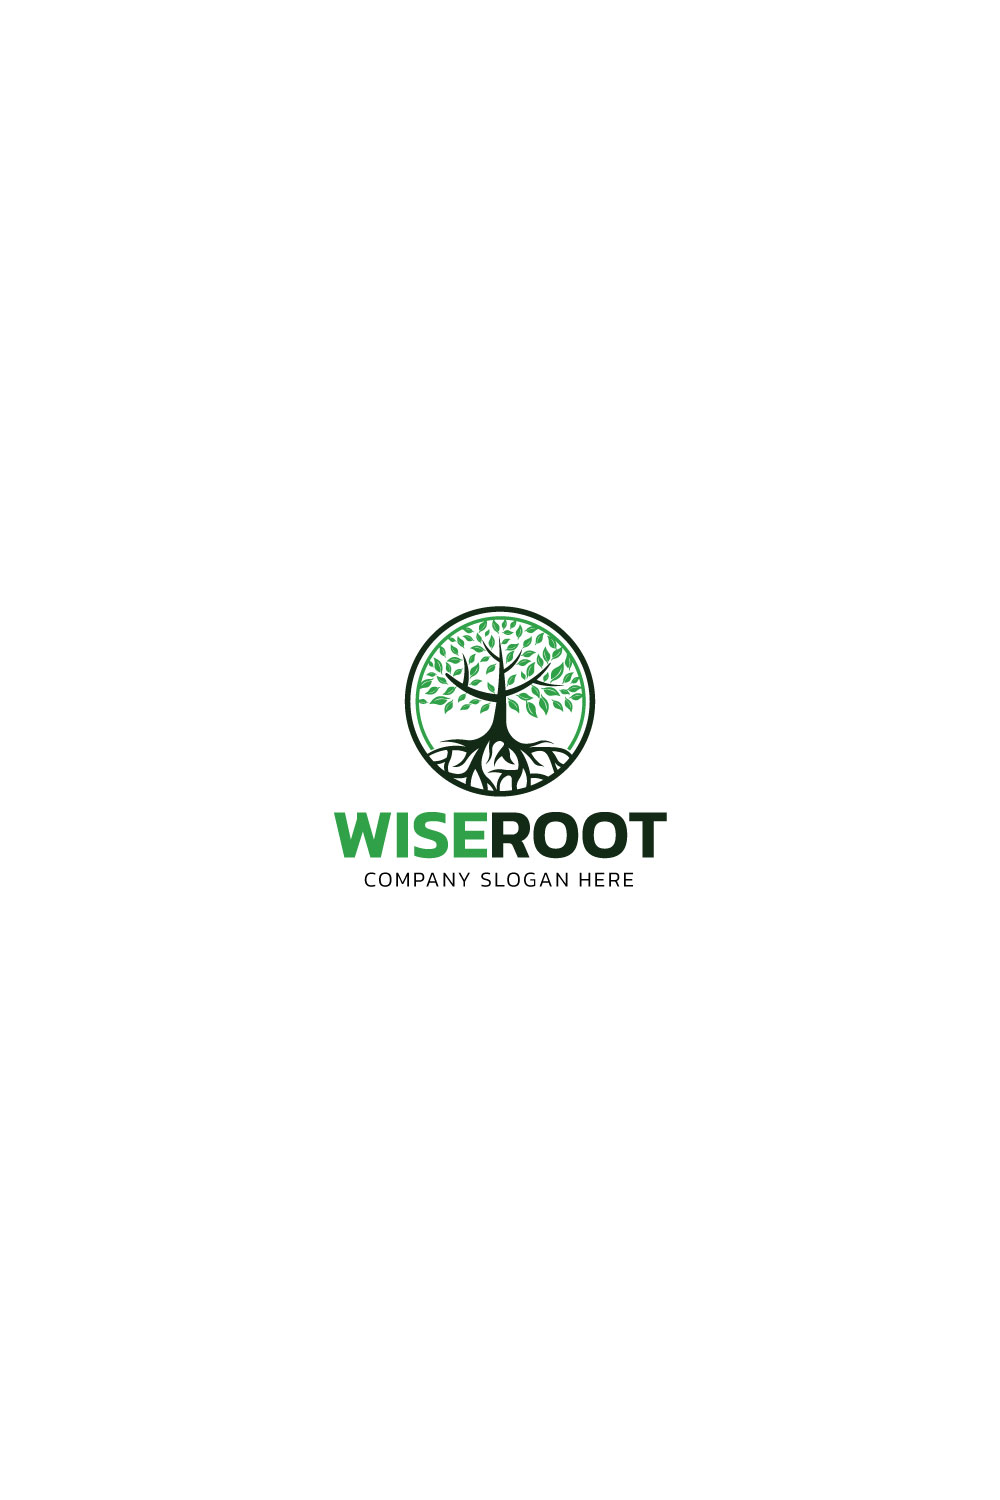 Wise Root Logo design pinterest preview image.